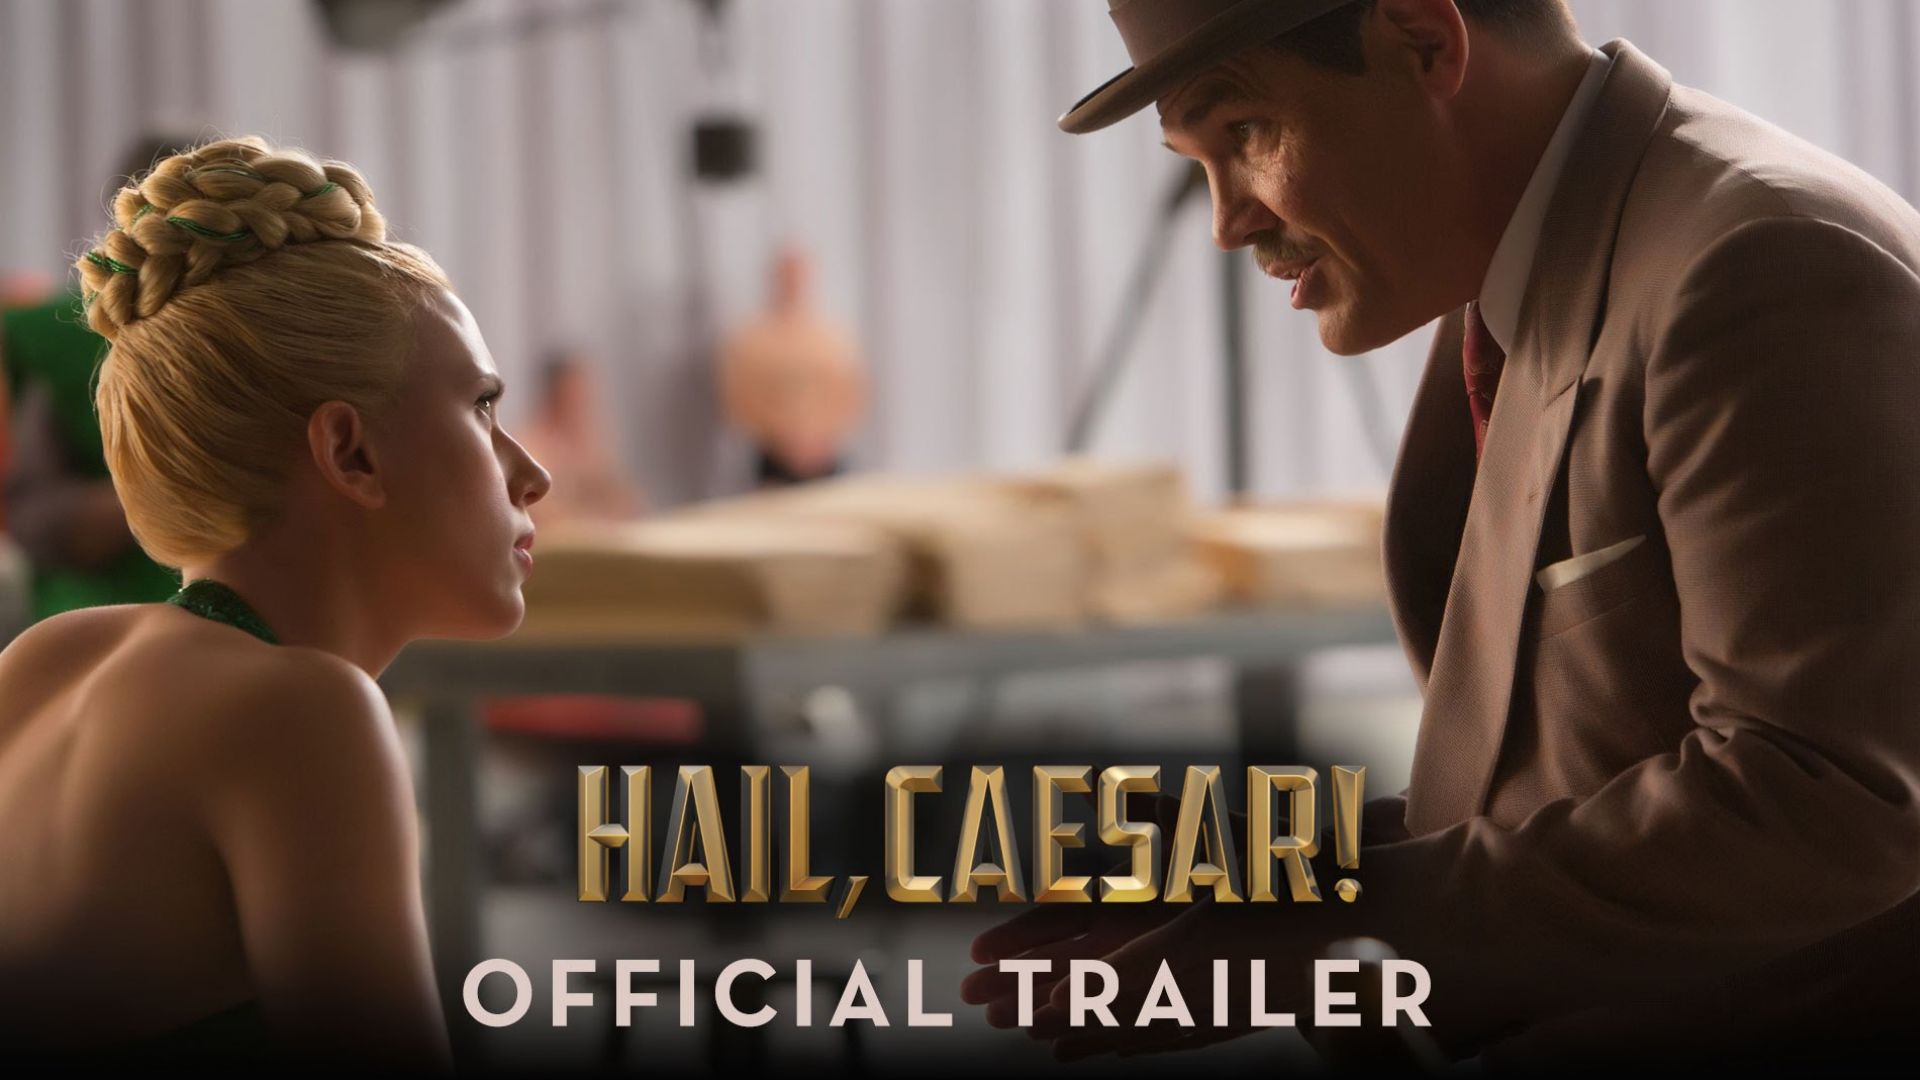 George Clooney gets kidnapped in first trailer for The Coen Brothers &#039;Hail, Caesar!&#039;